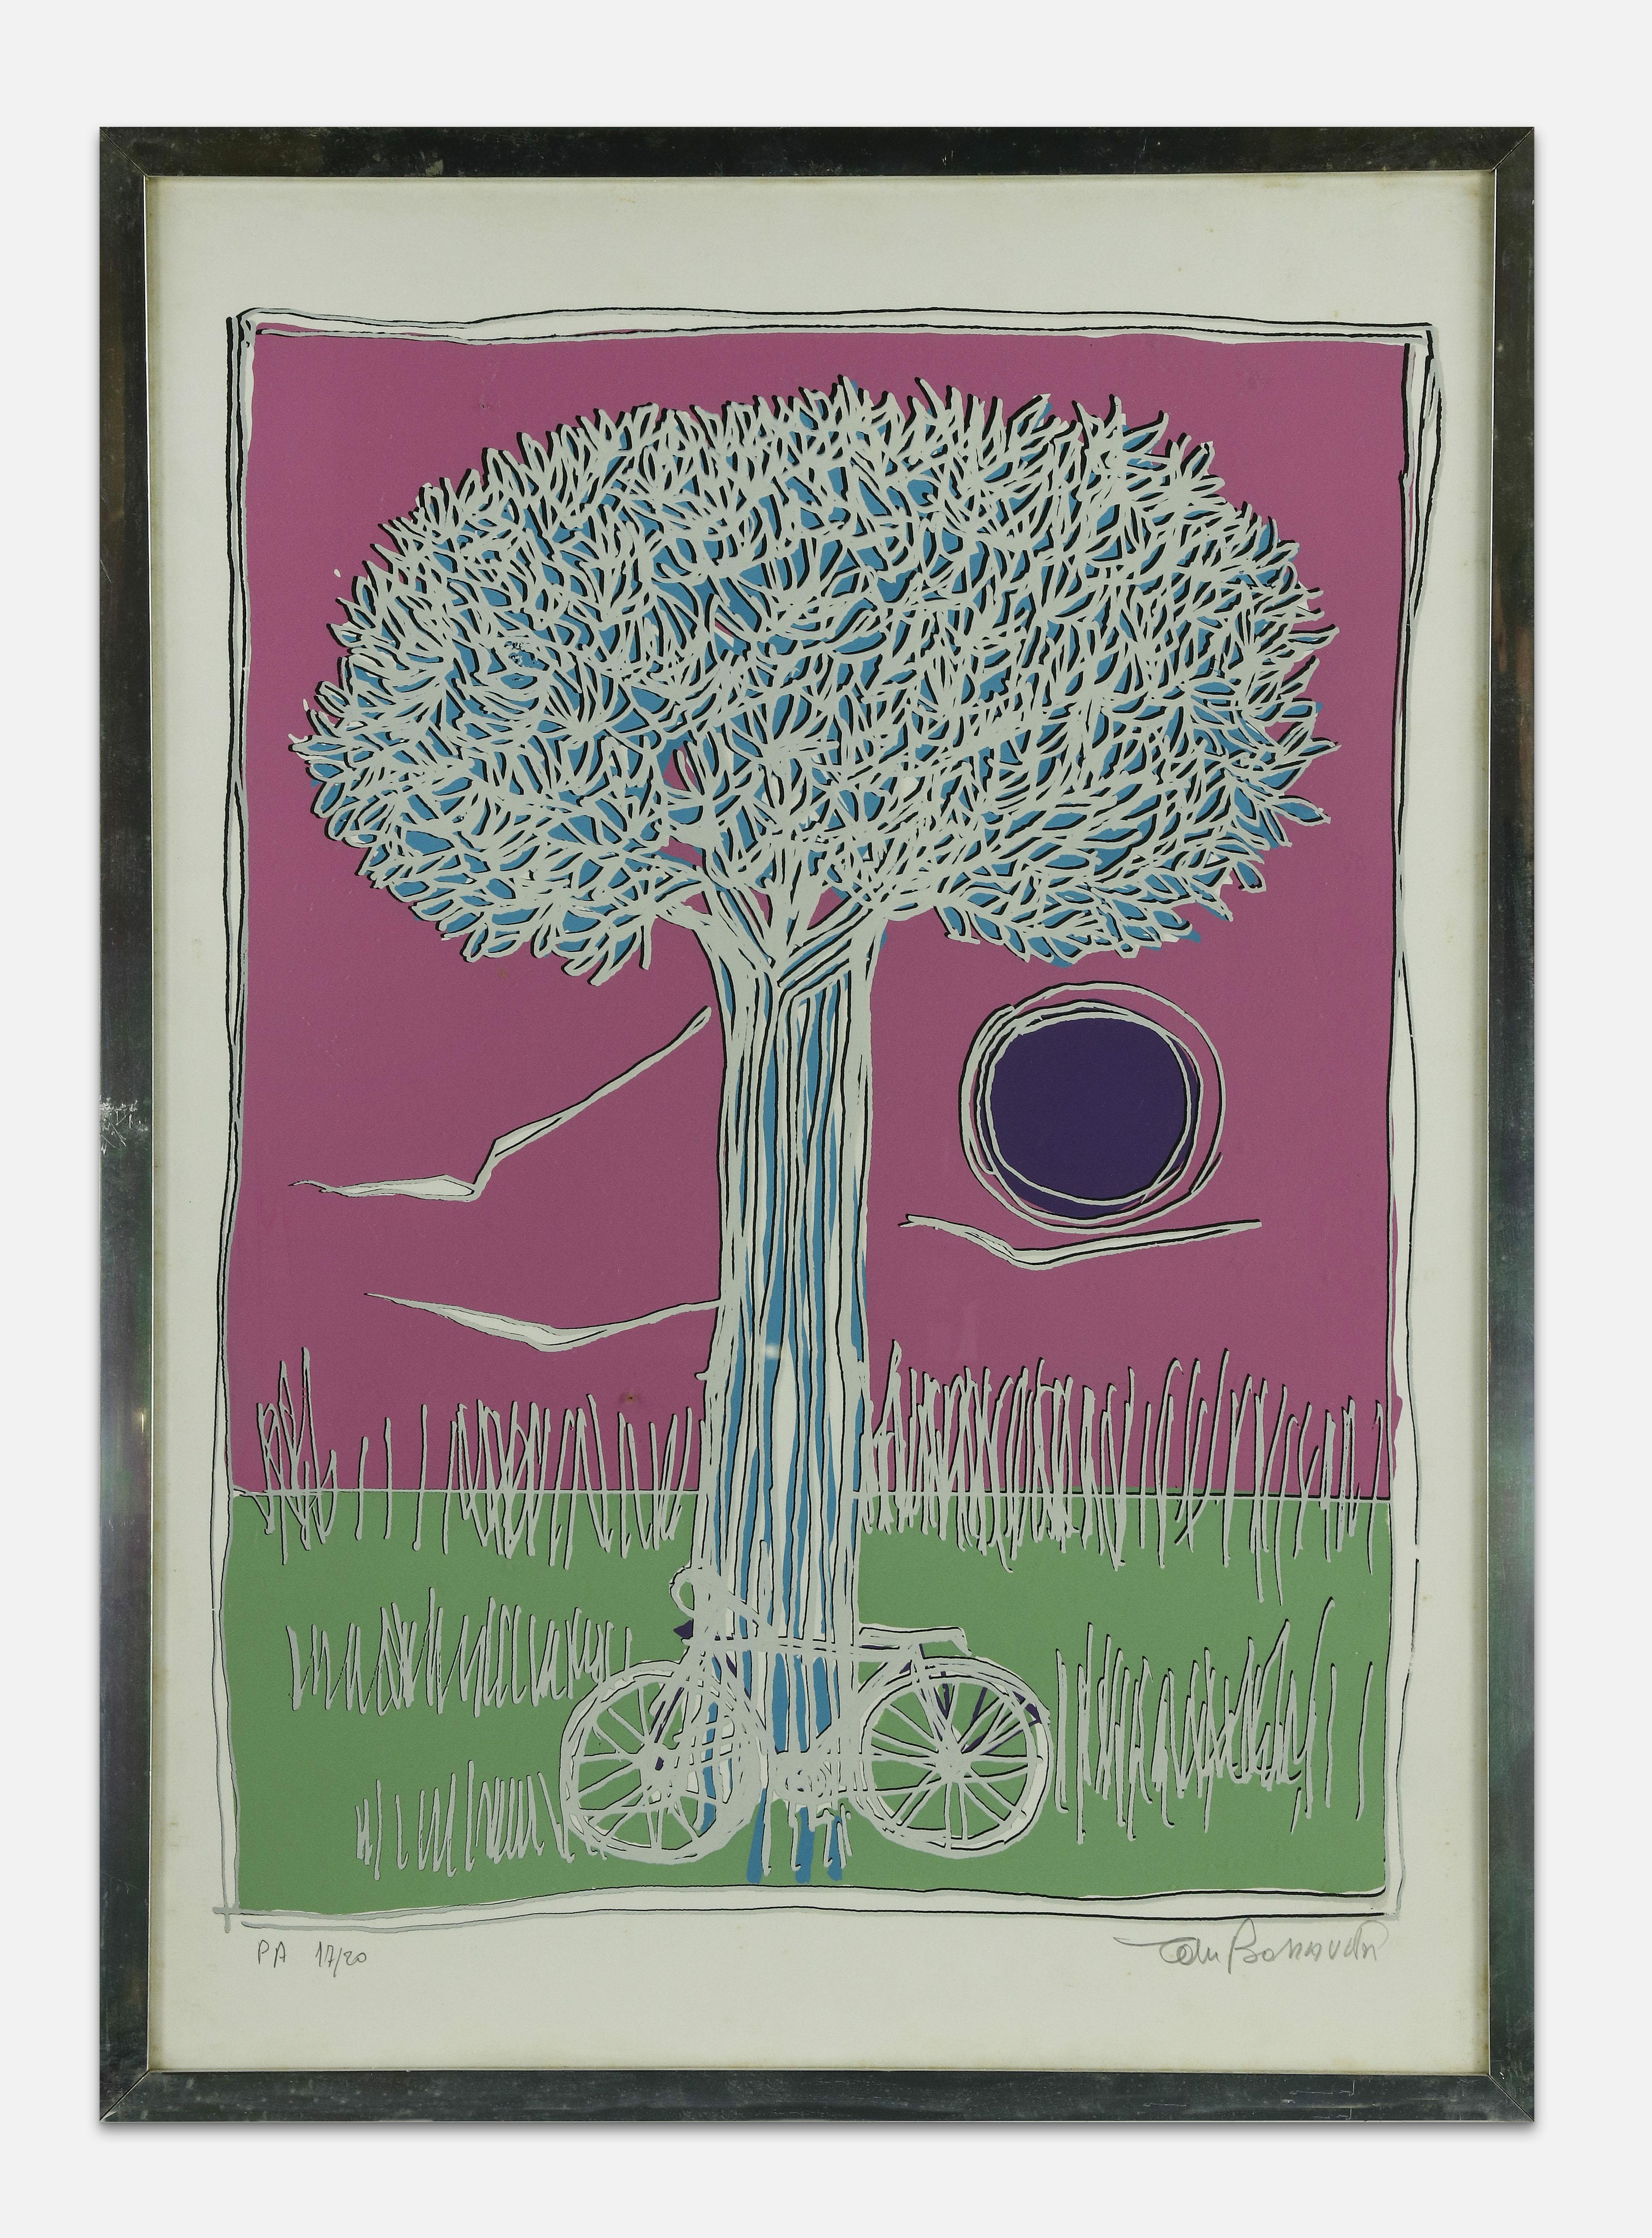 Tree is an original contemporary artwork realized by Alfonso Bonavita in 1990s.

Mixed colored lithograph.

Hand signed and numbered on the lower margin.

Artist's proof. Edition of 17/20

